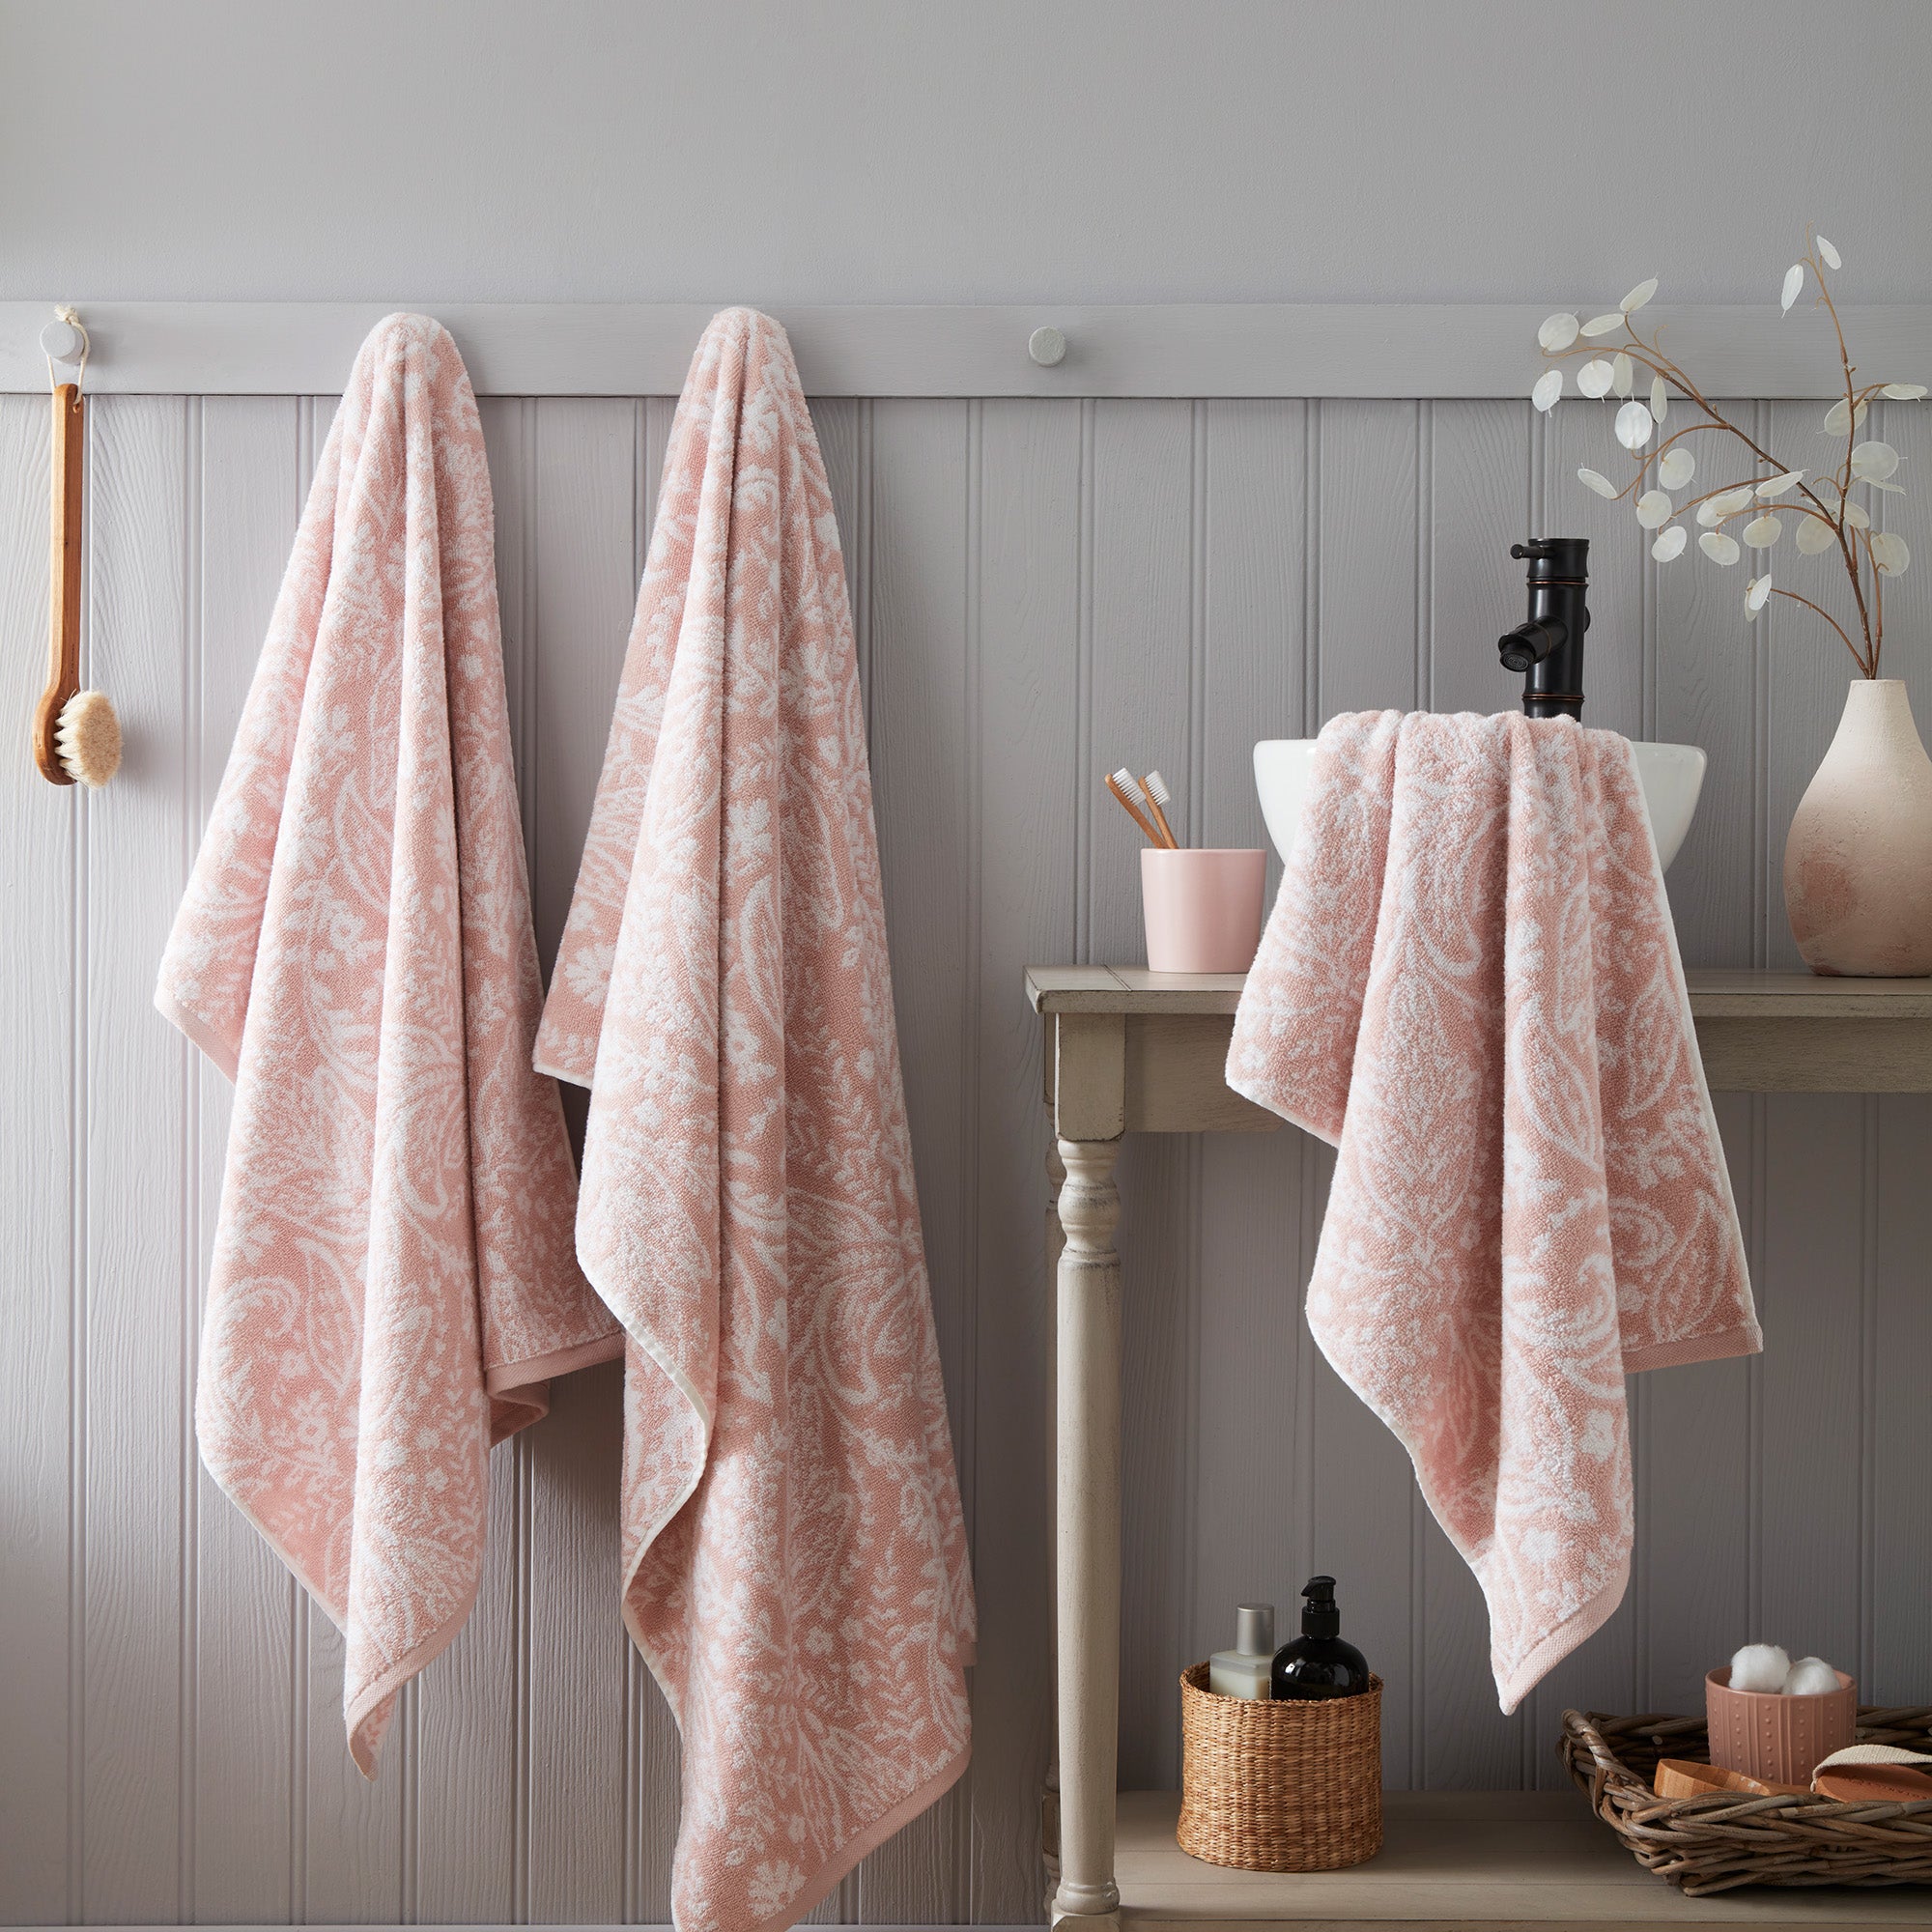 Hand Towel (2 pack) Aveline by D&D Bathroom in Soft Pink